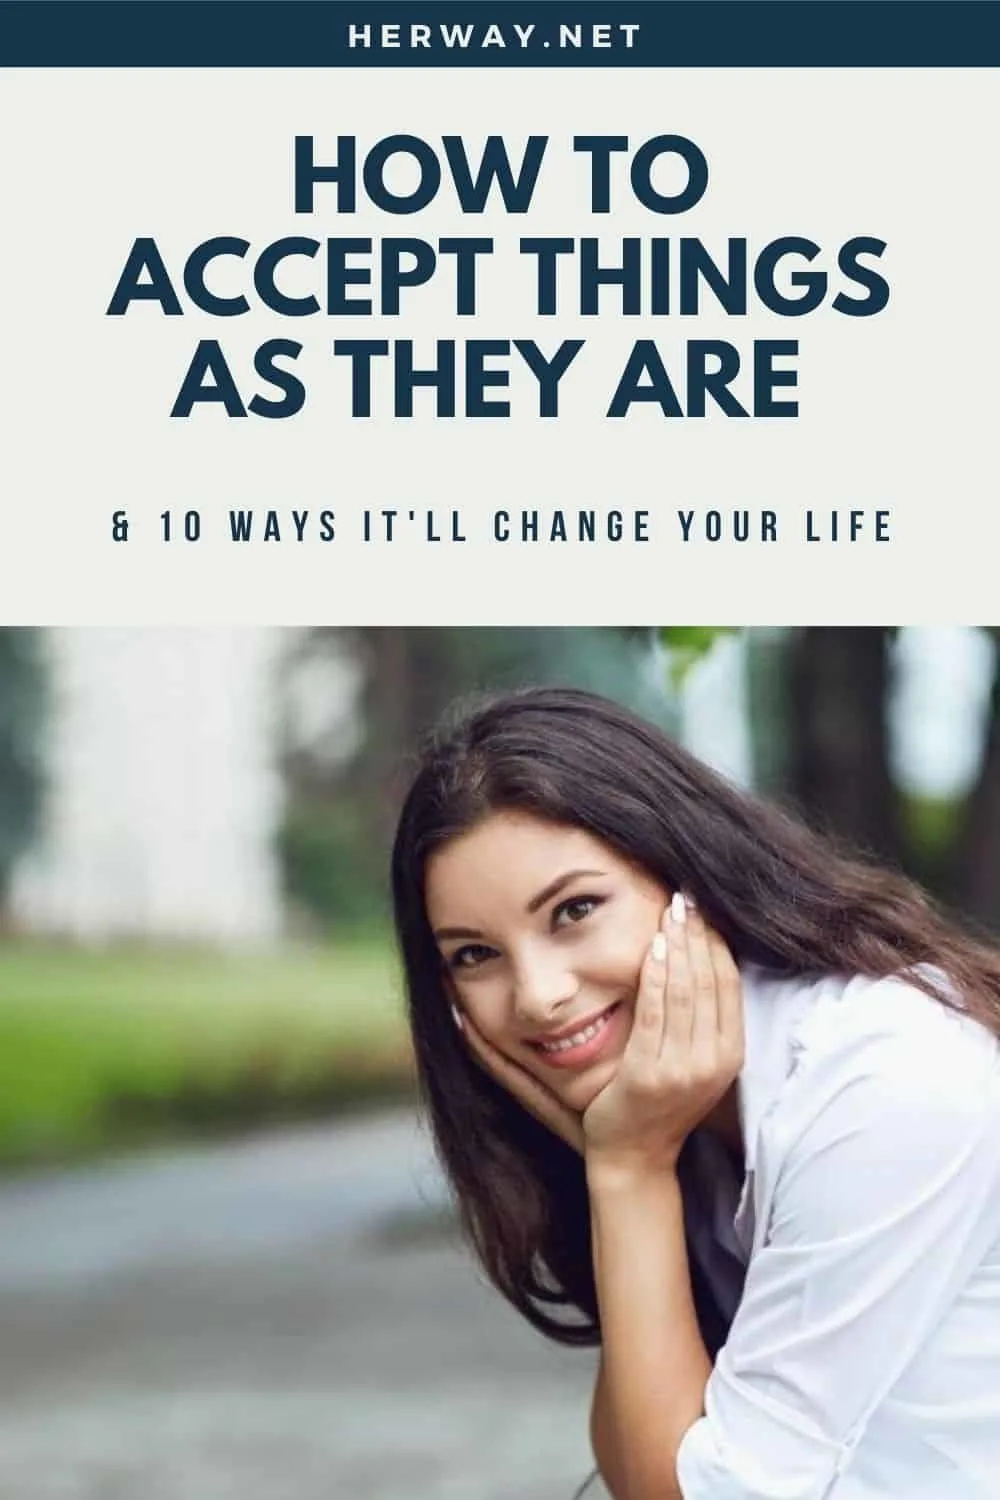 How To Accept Things As They Are & 10 Ways It'll Change Your Life